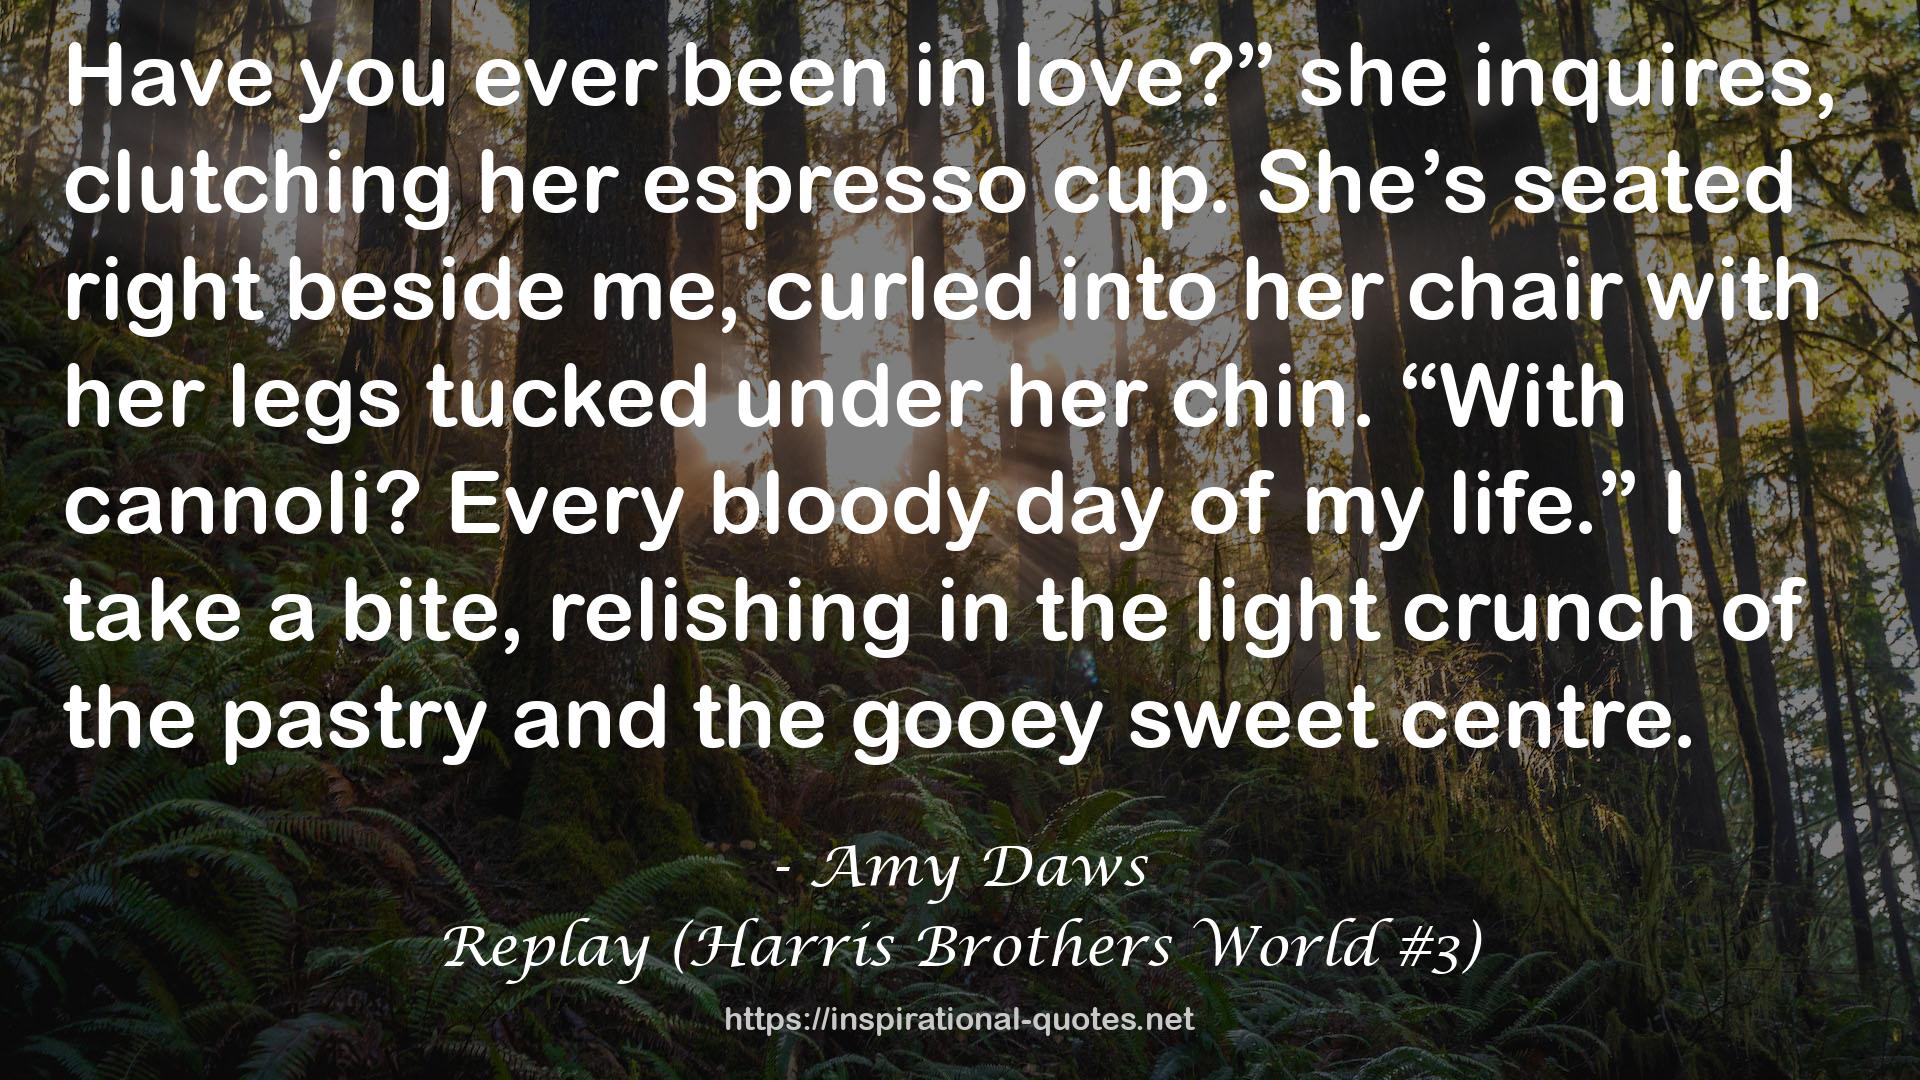 Replay (Harris Brothers World #3) QUOTES